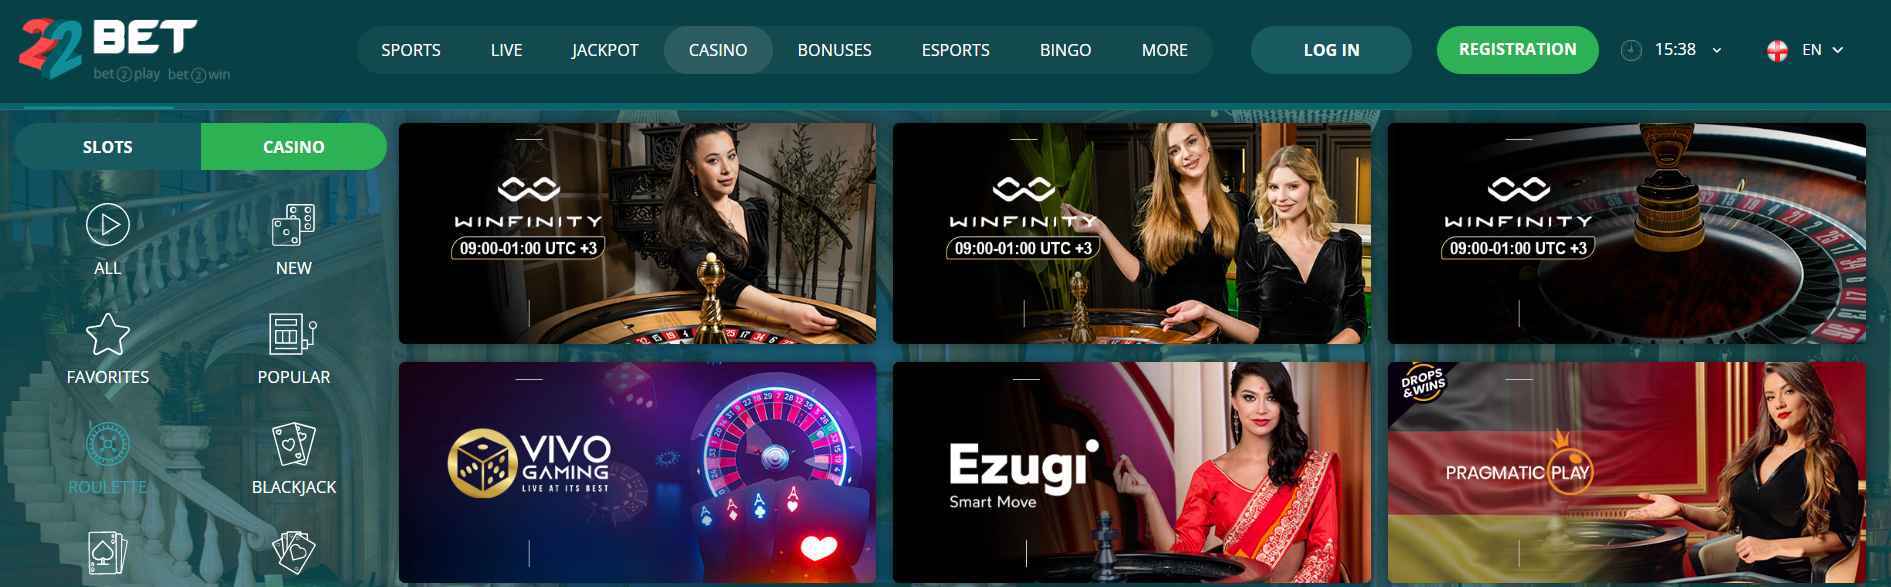 22bet roulette casino table game-compressed